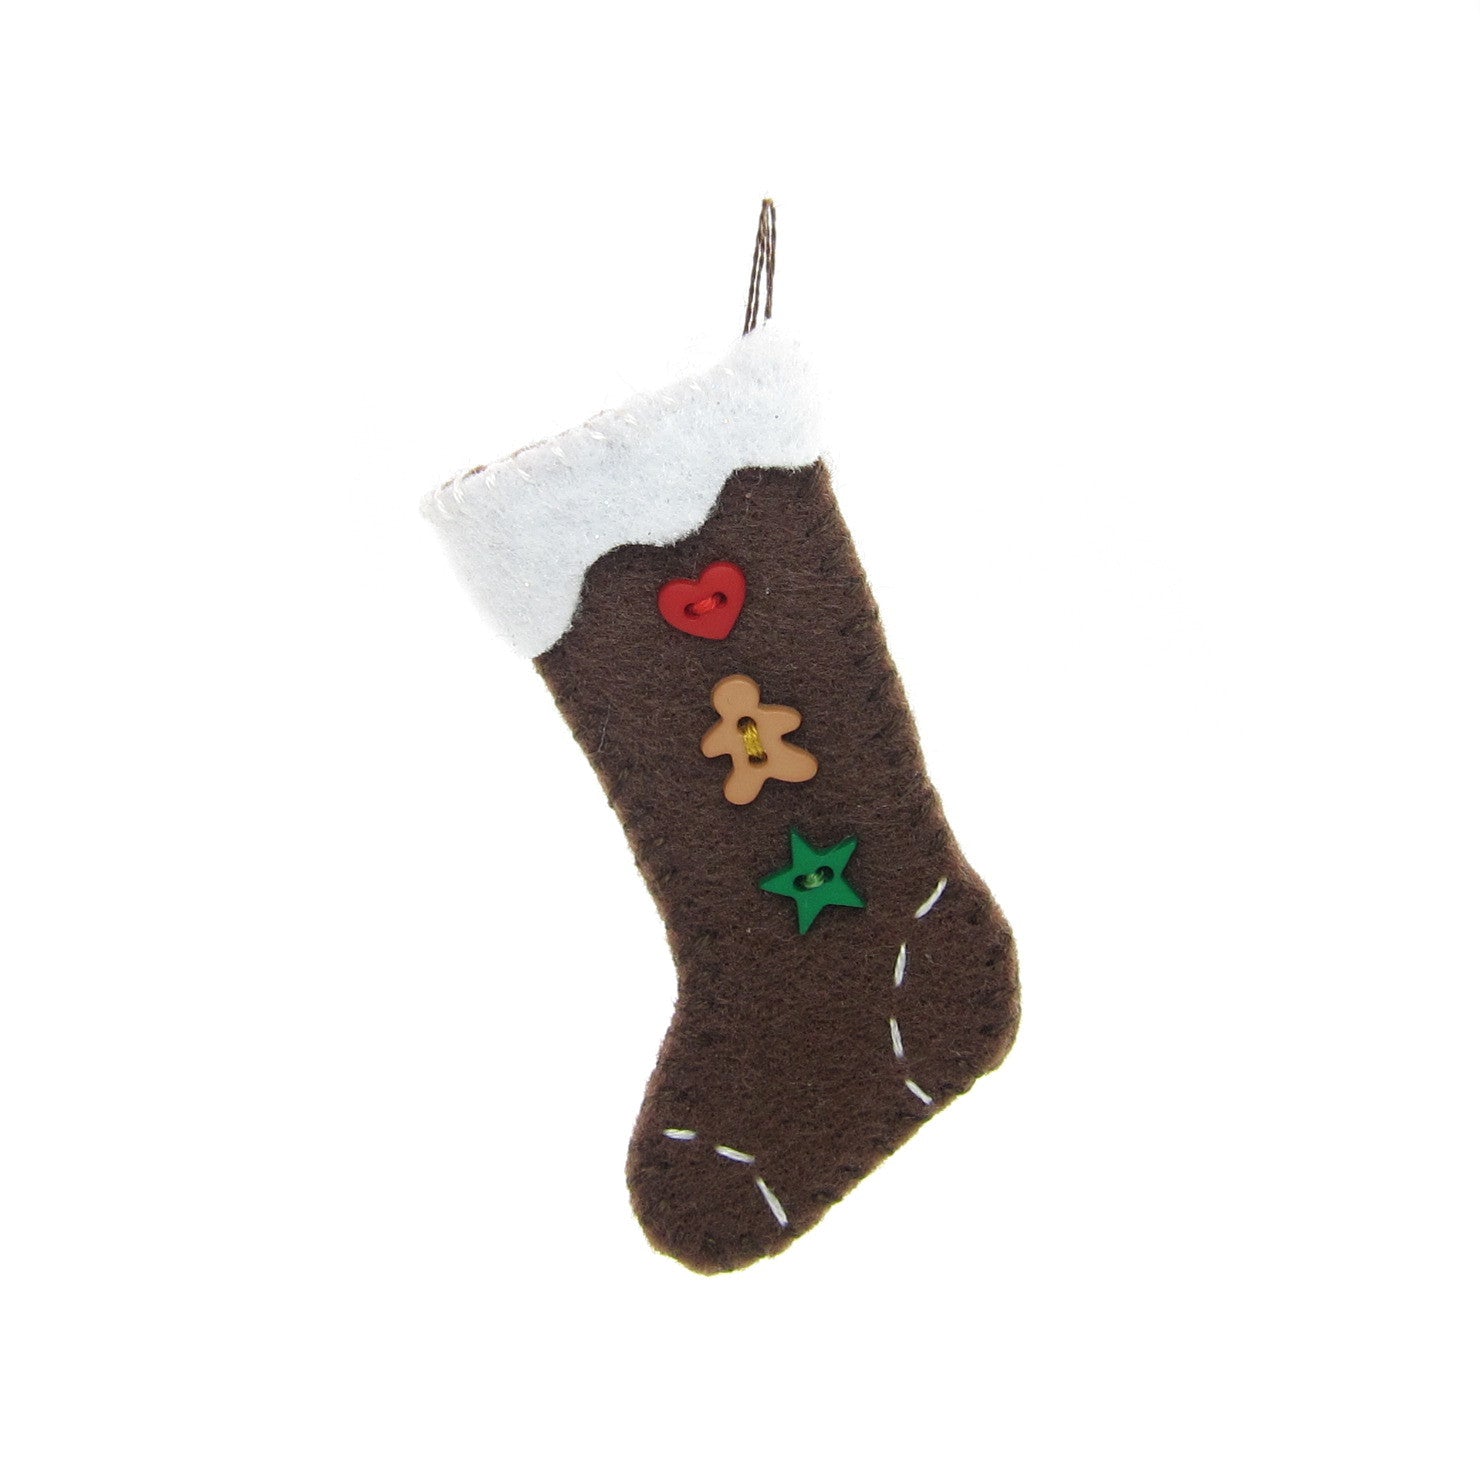 Miniature Gingerbread Christmas Stocking Hand Stitched Felt Ornament ...